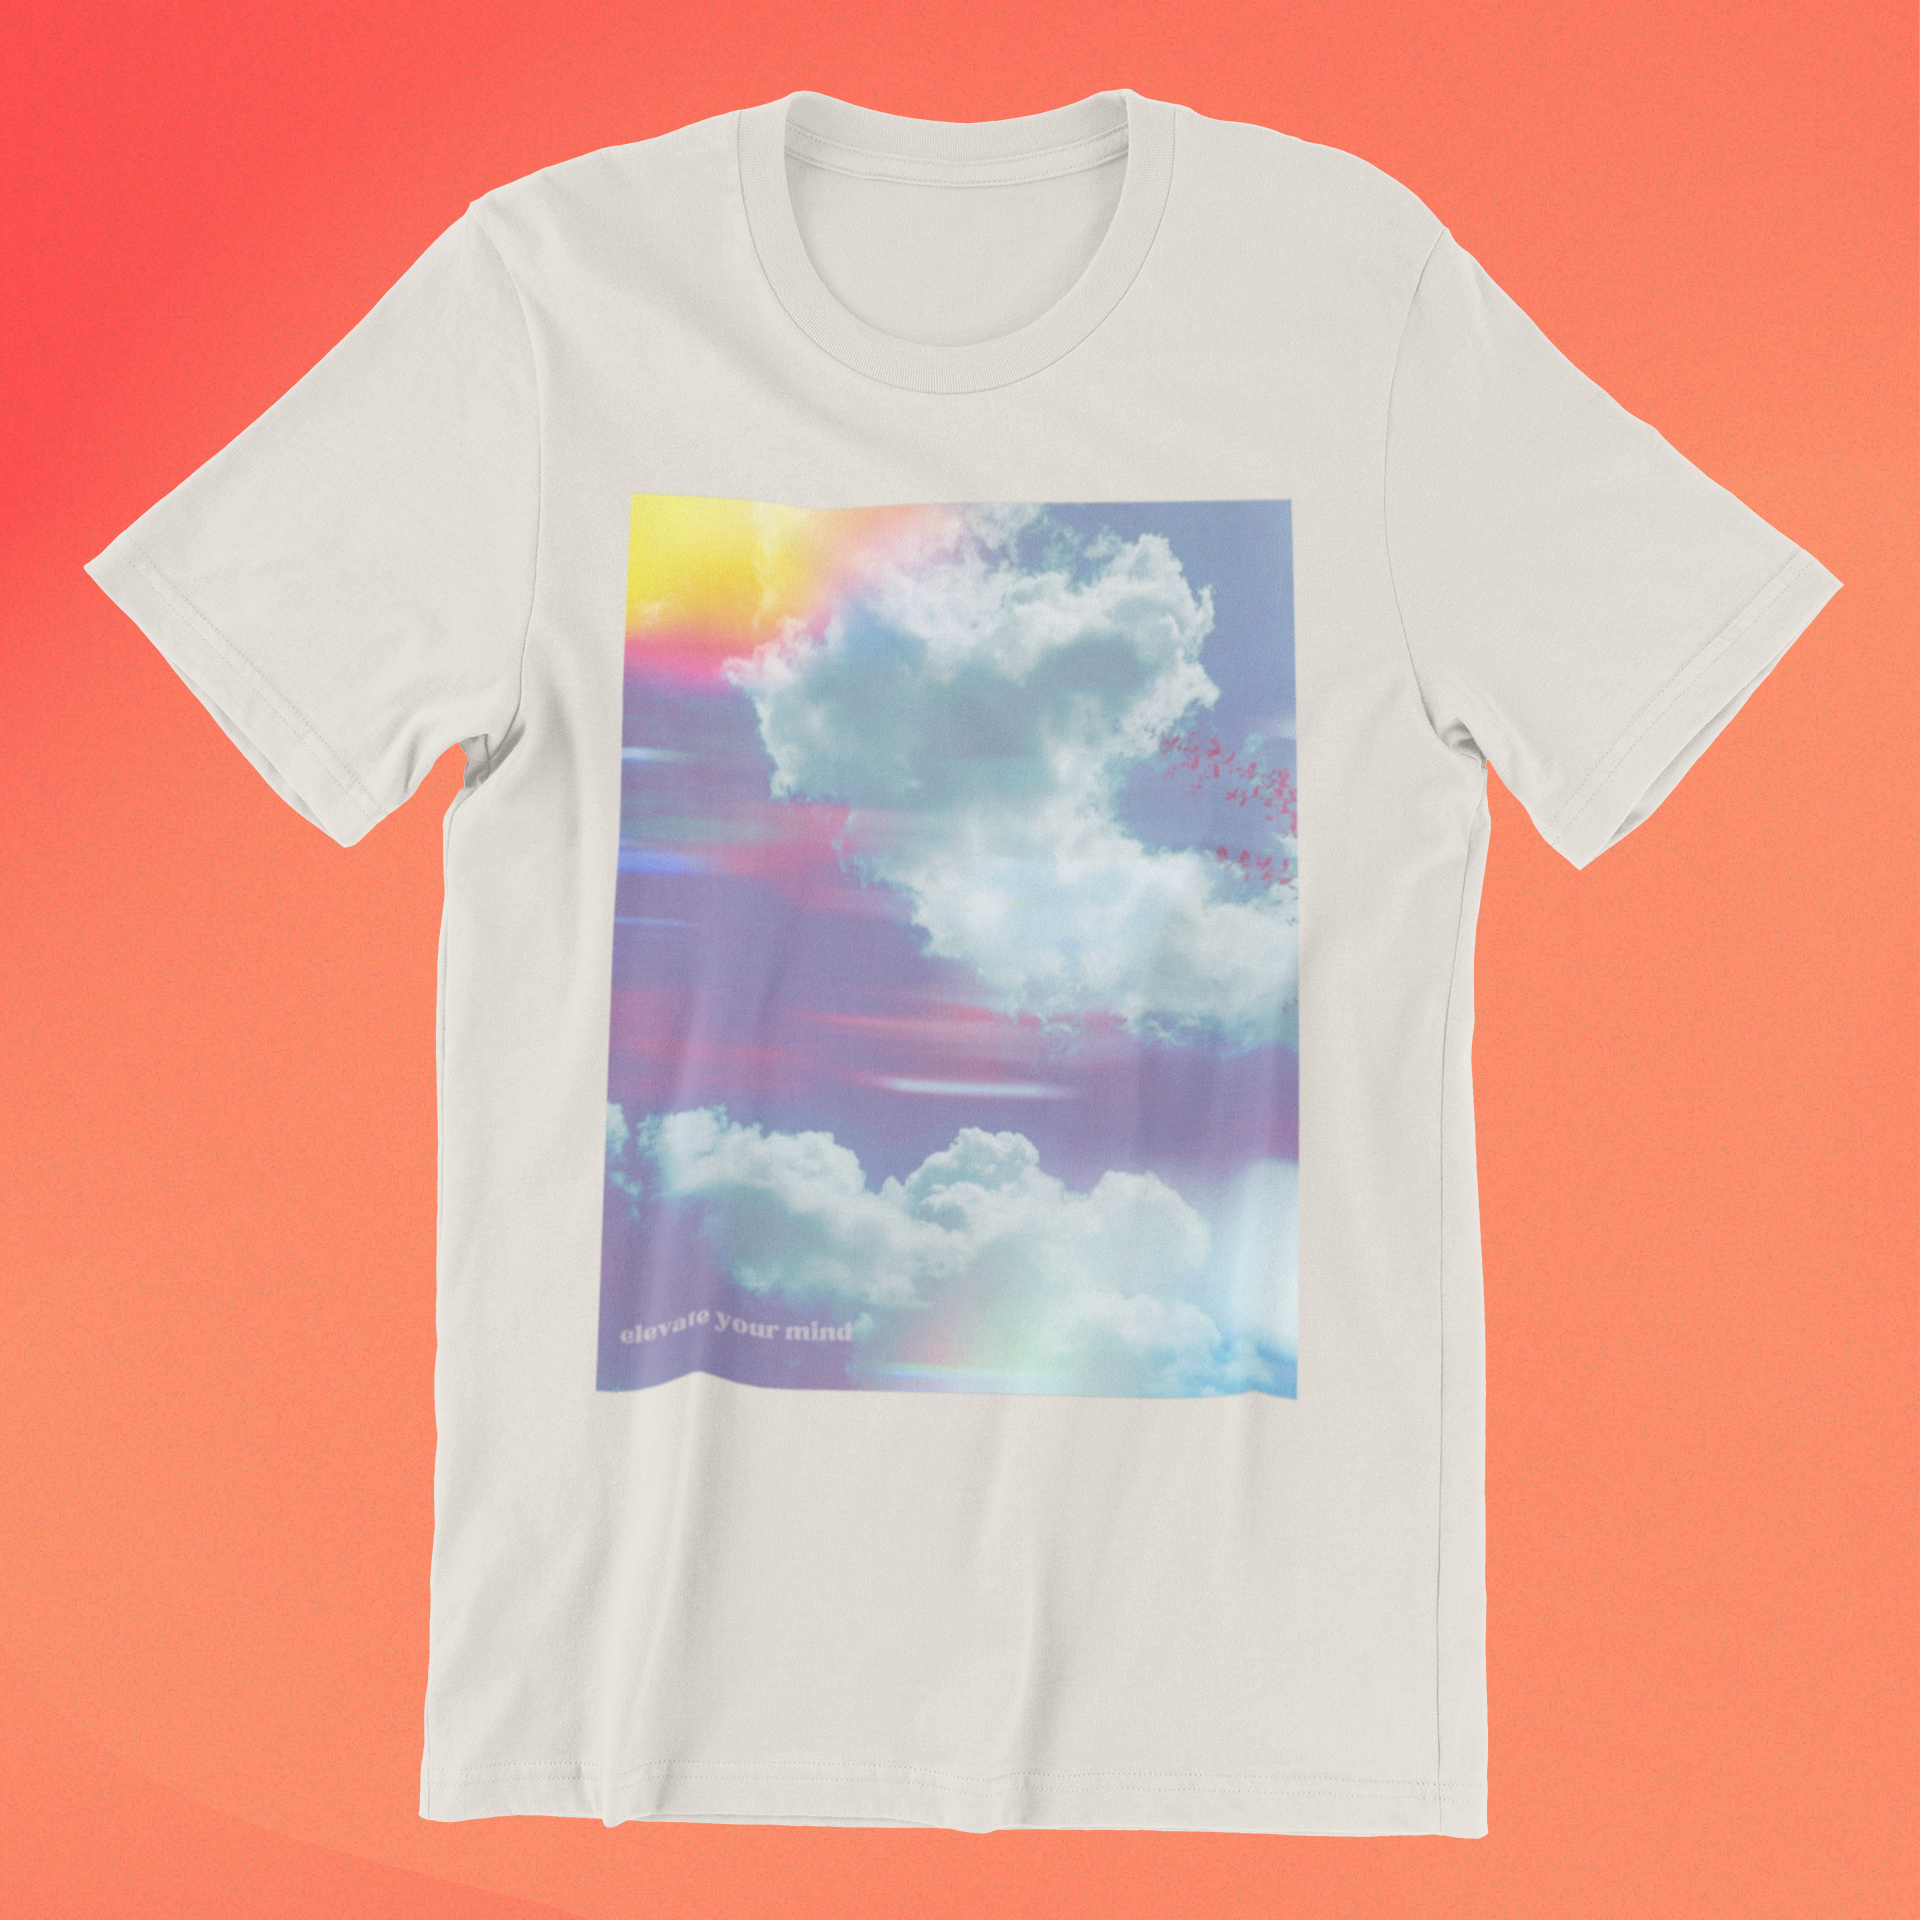 ELEVATE YOUR MIND GRAPHIC T-SHIRT